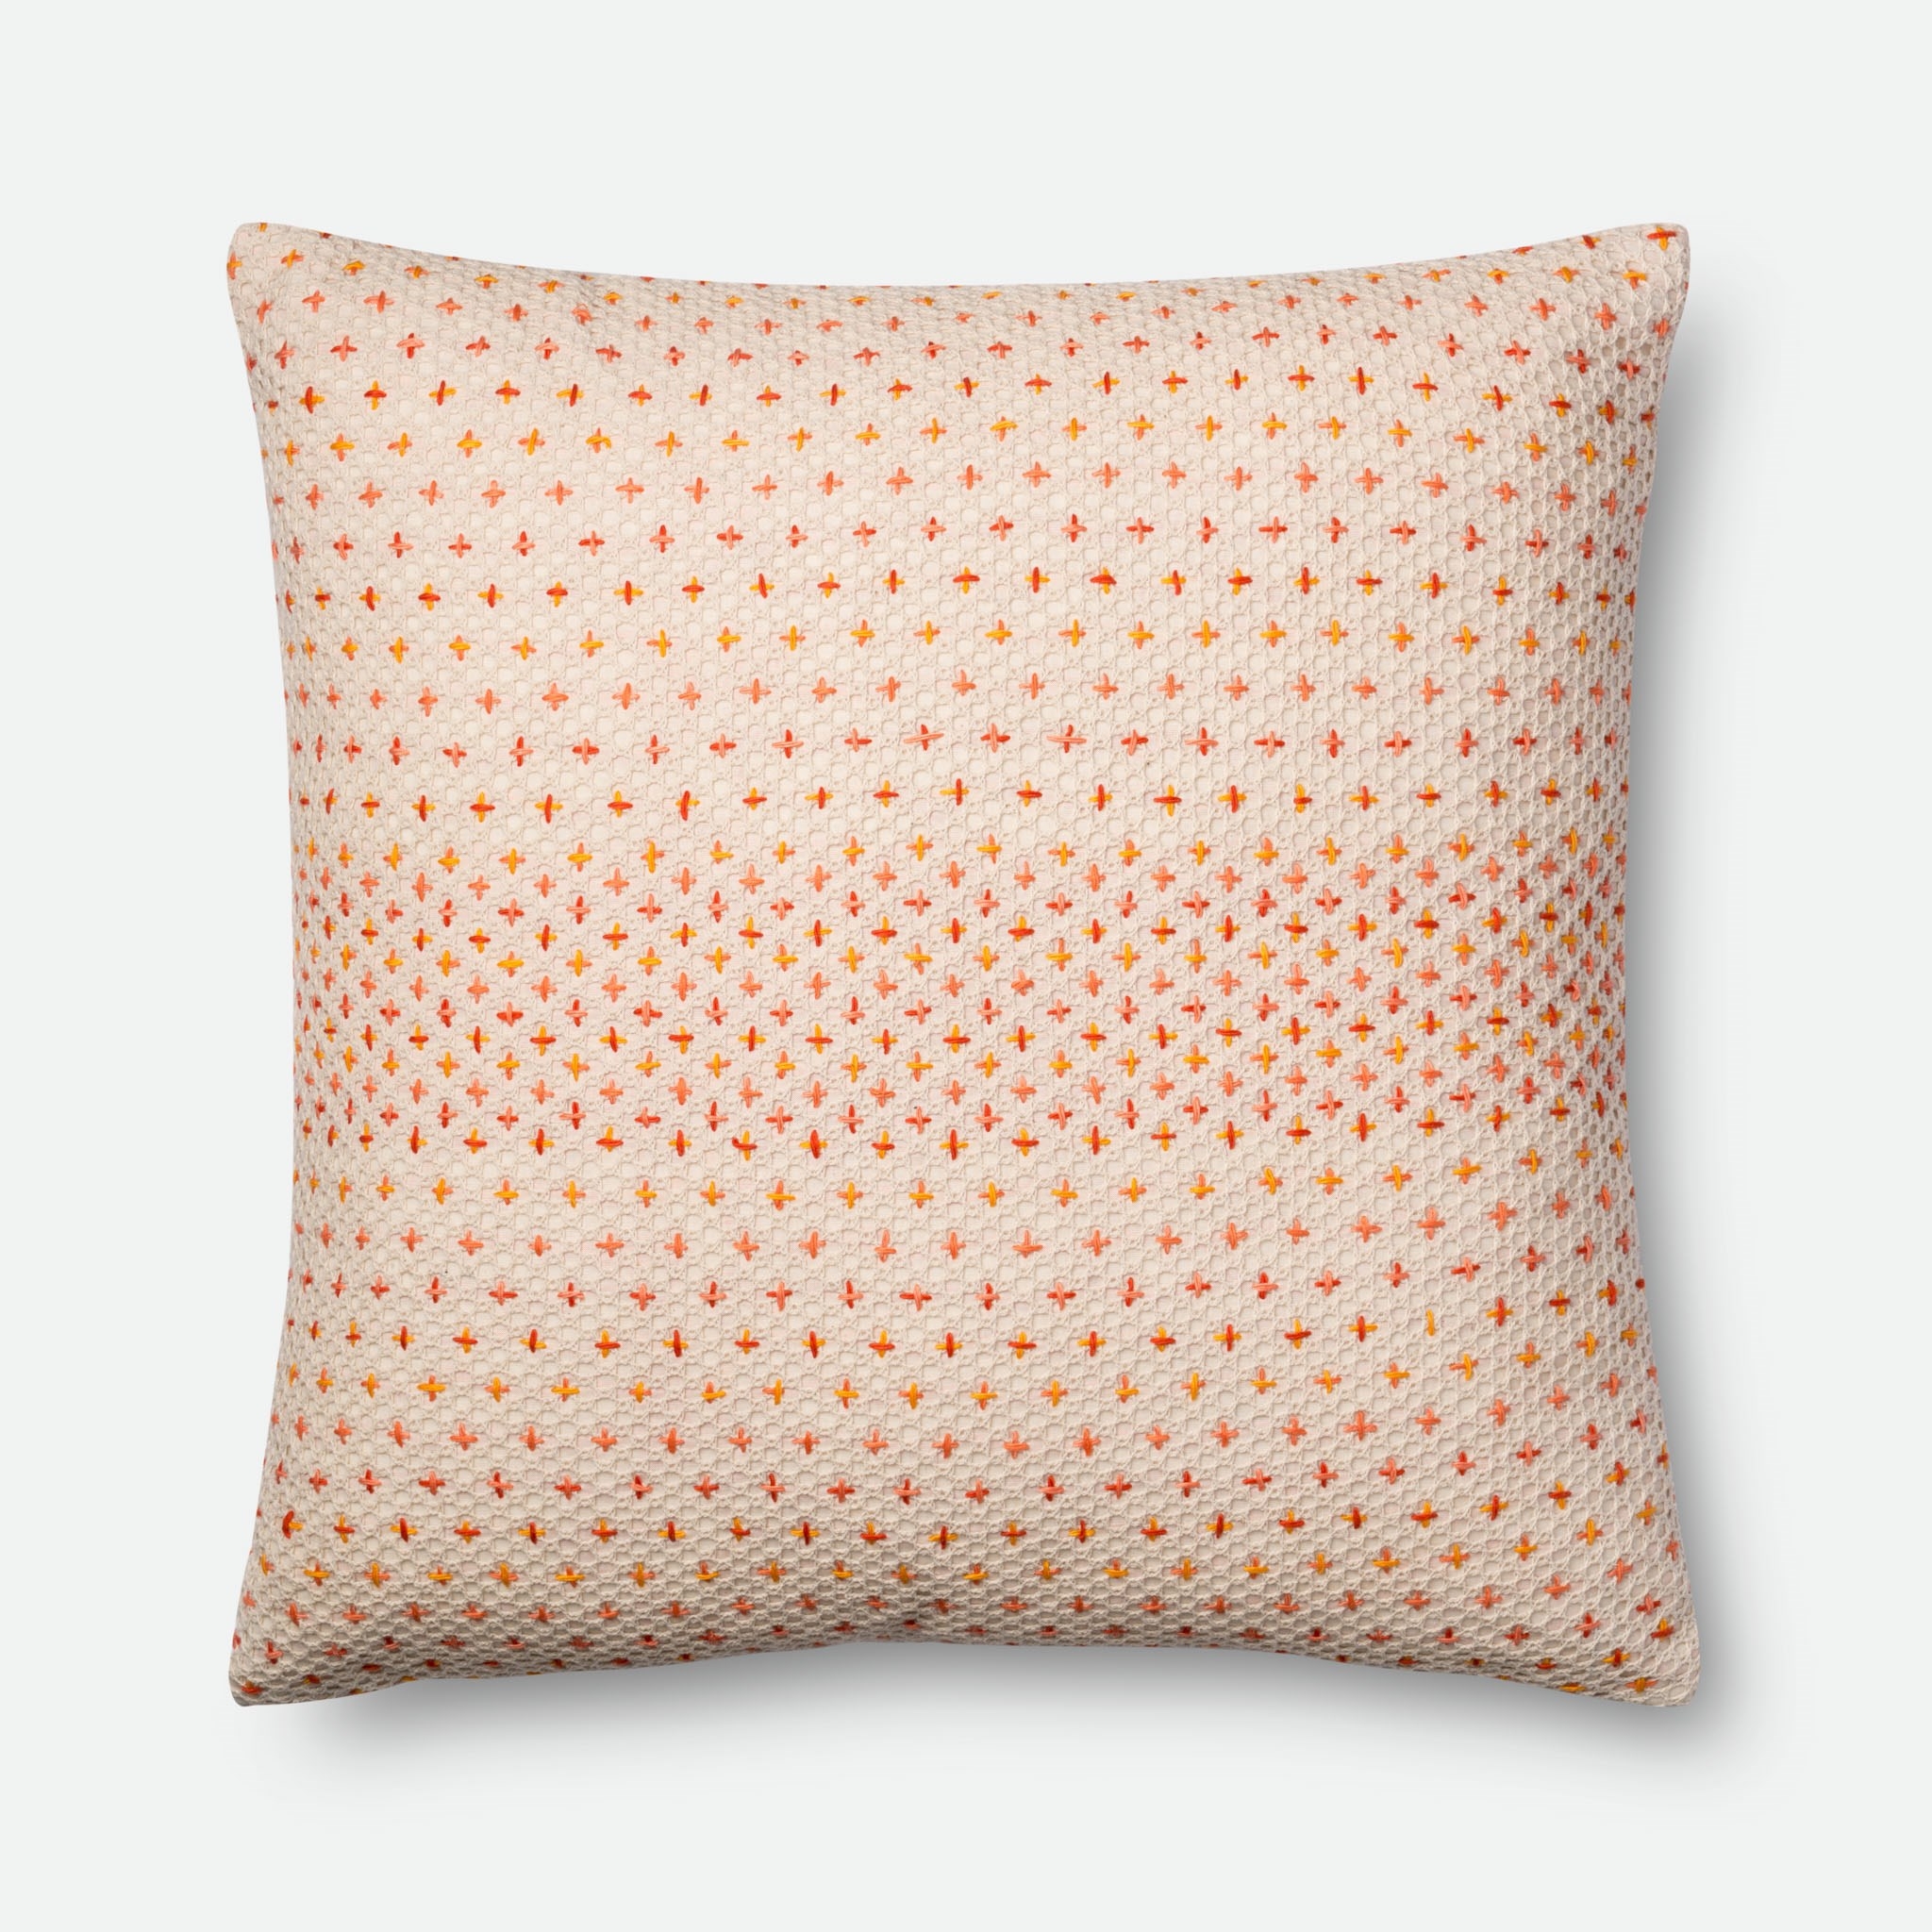 PILLOWS - CORAL / MULTI - Image 0